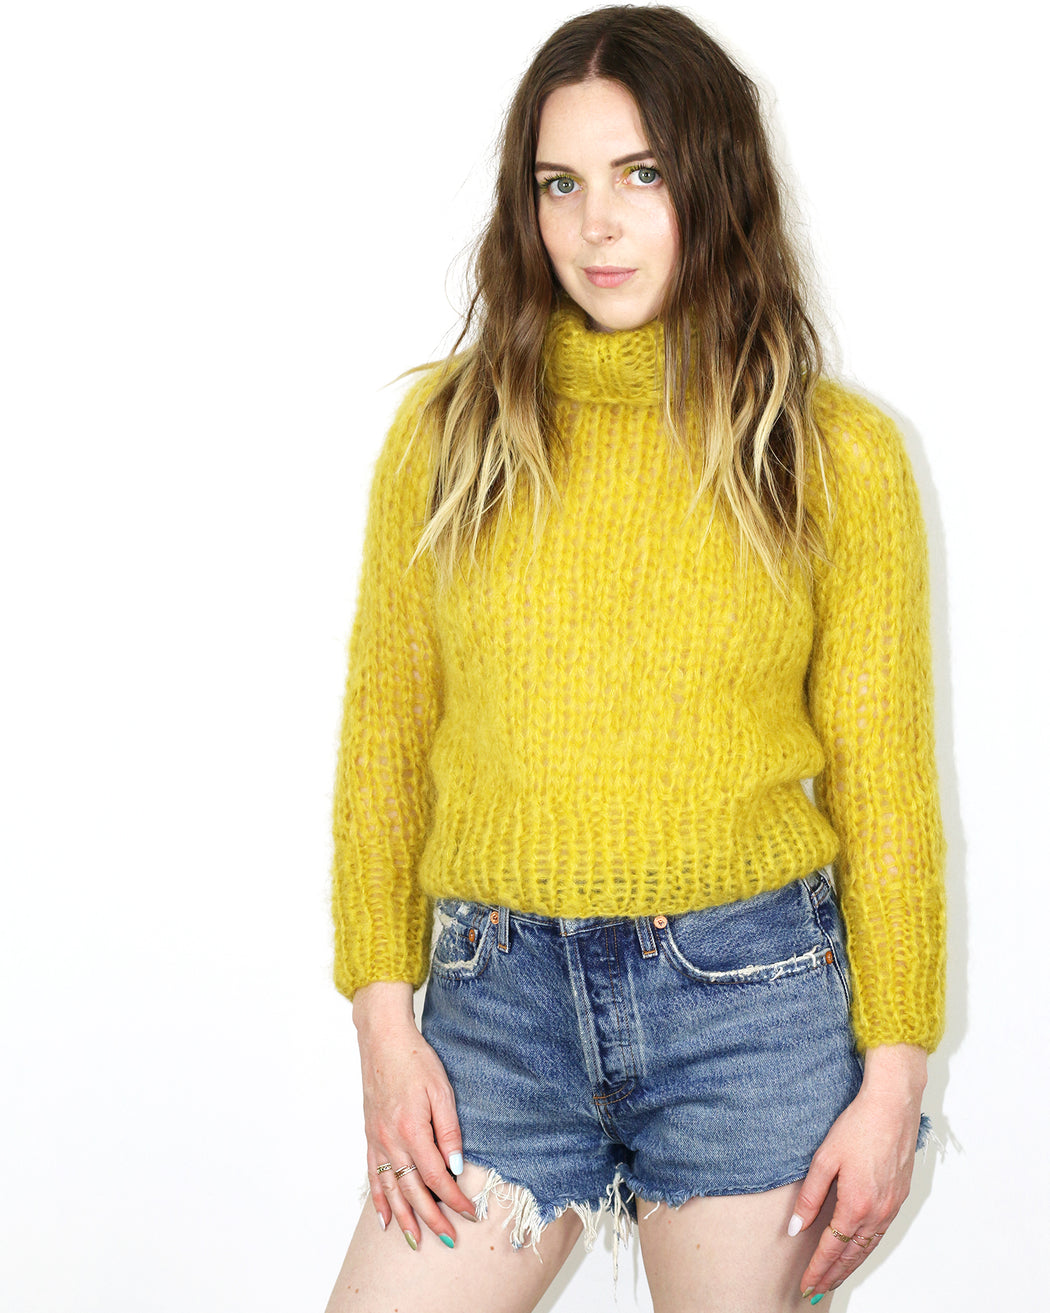 Maiami:Short Turtleneck Sweater in a limey yellow